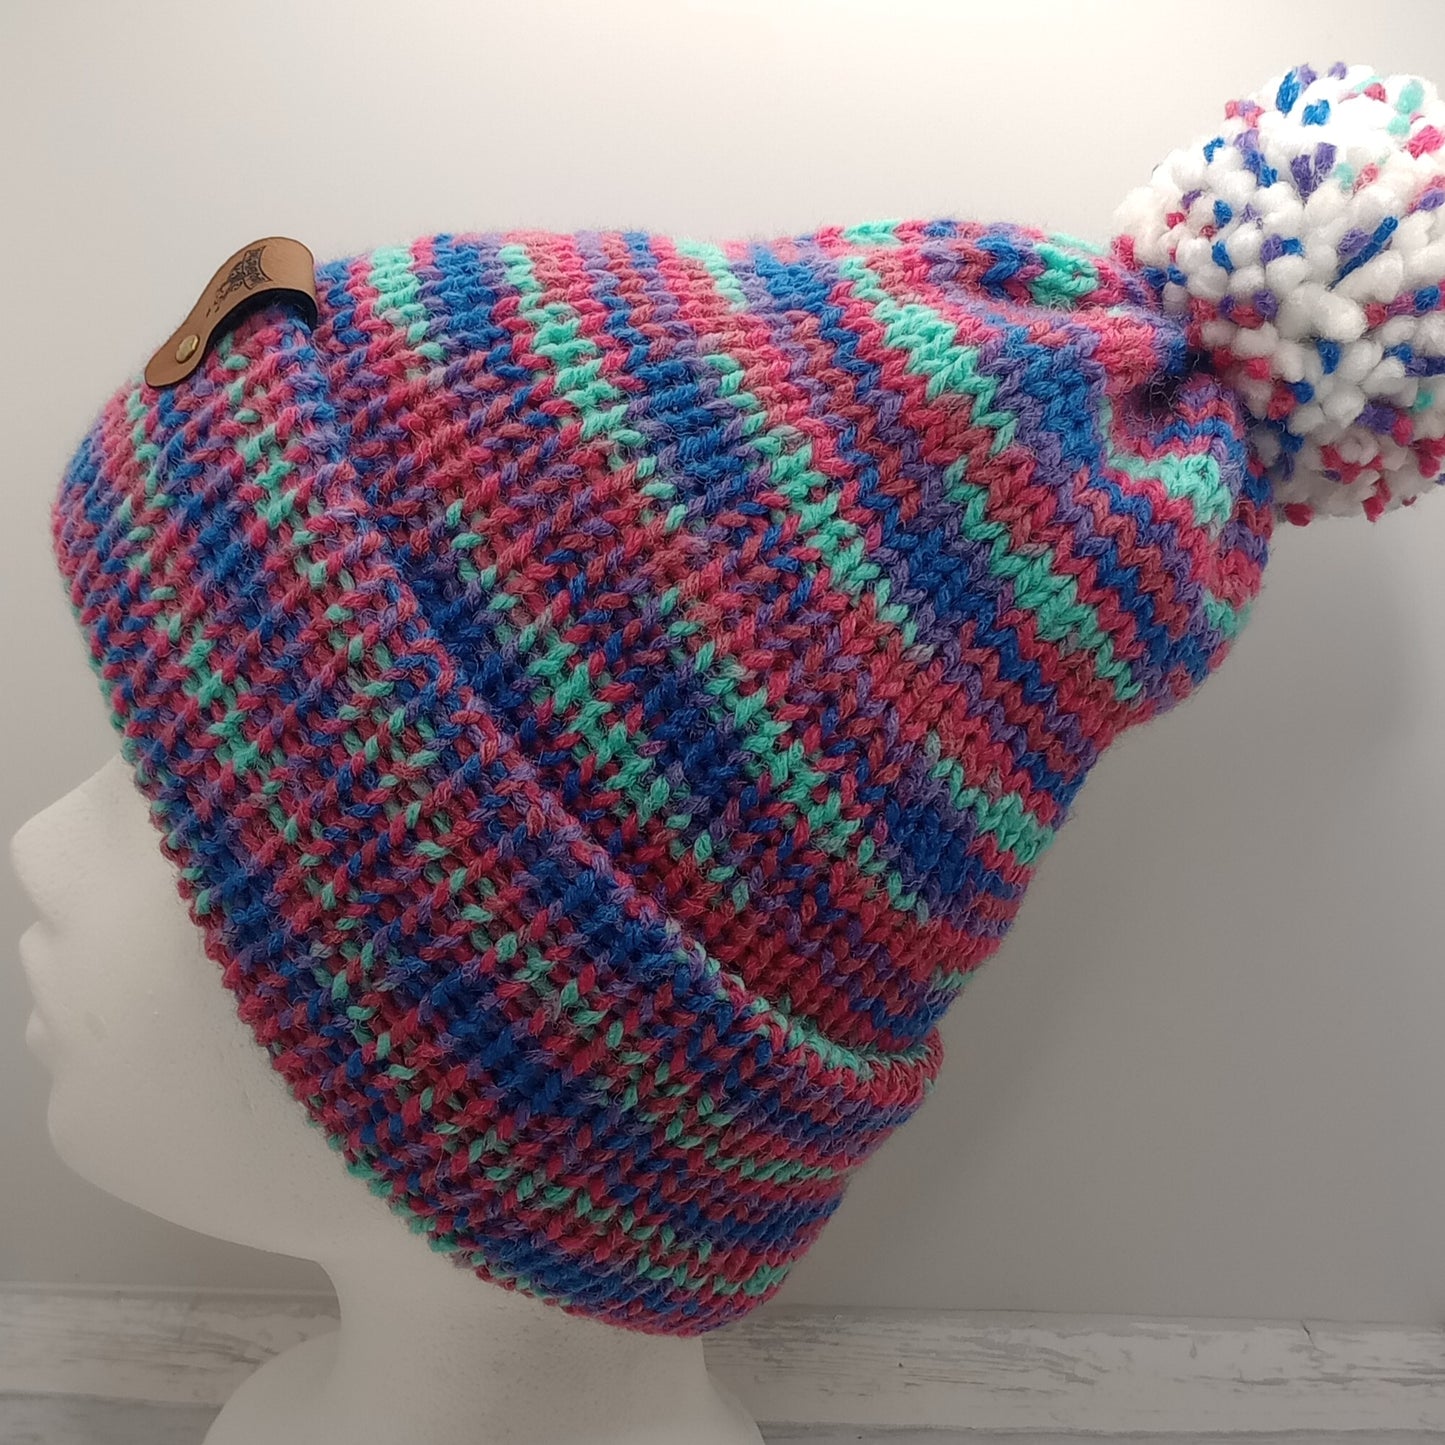 Limited Edition Knitted Purple Speckled Pompom Beanie